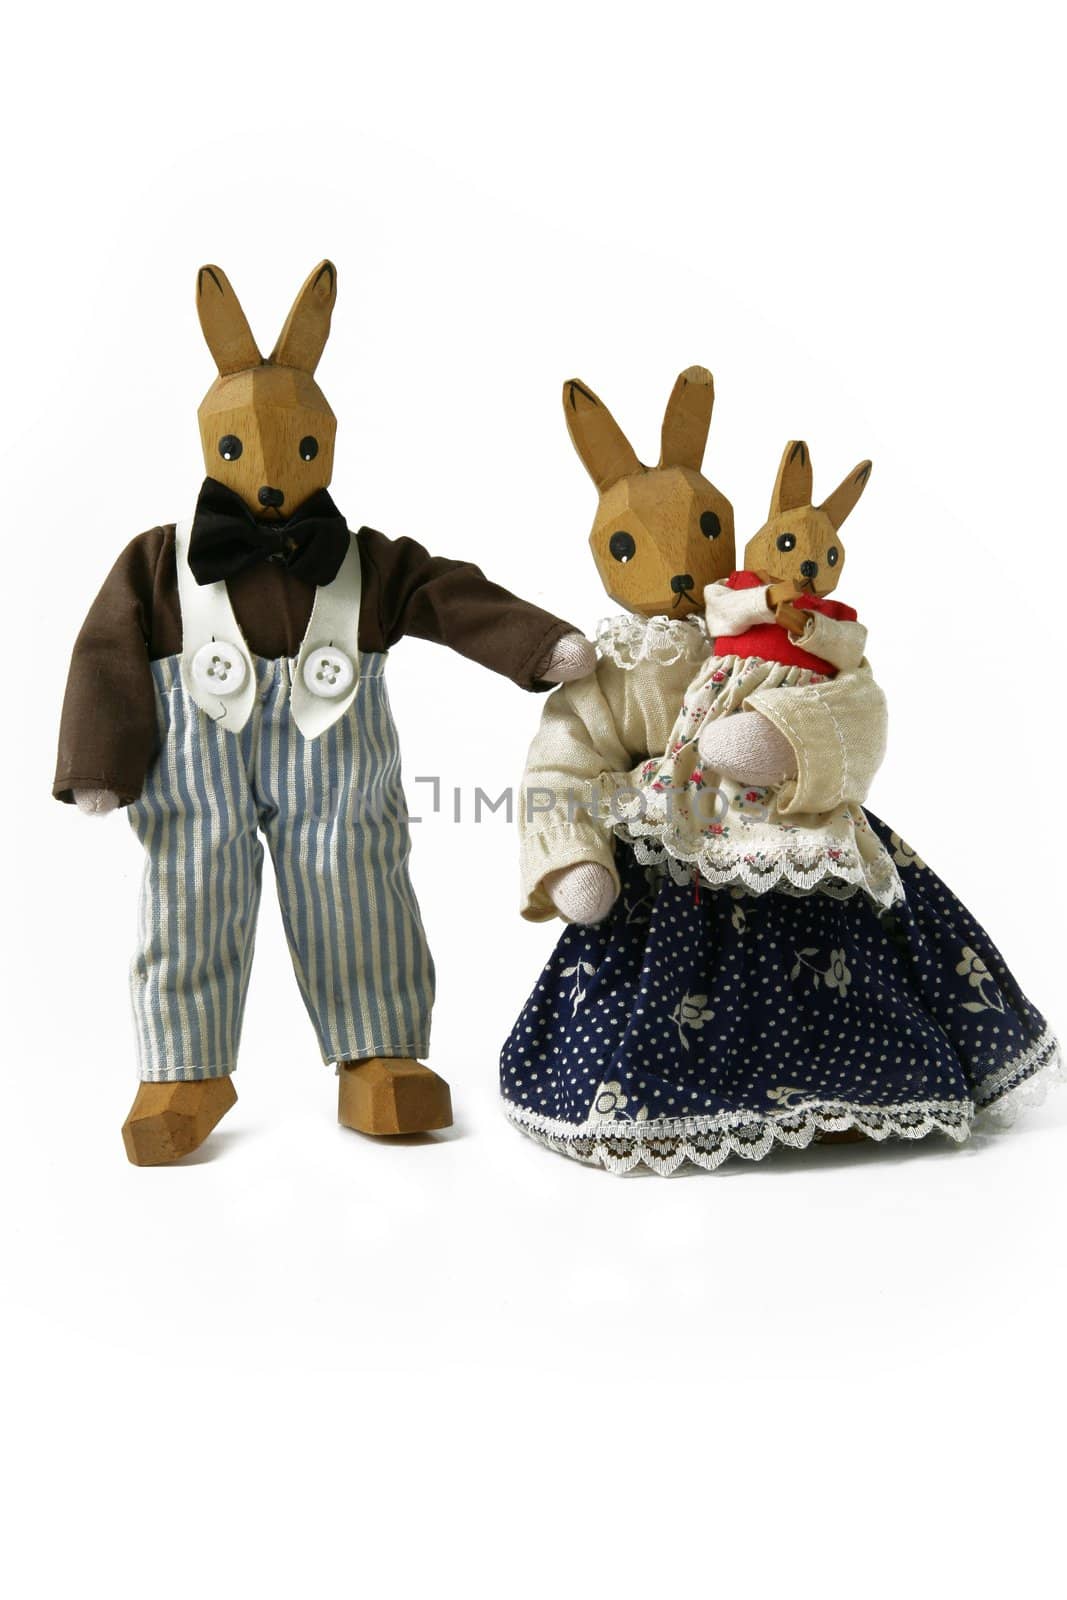 Toy rabbit family by phovoir